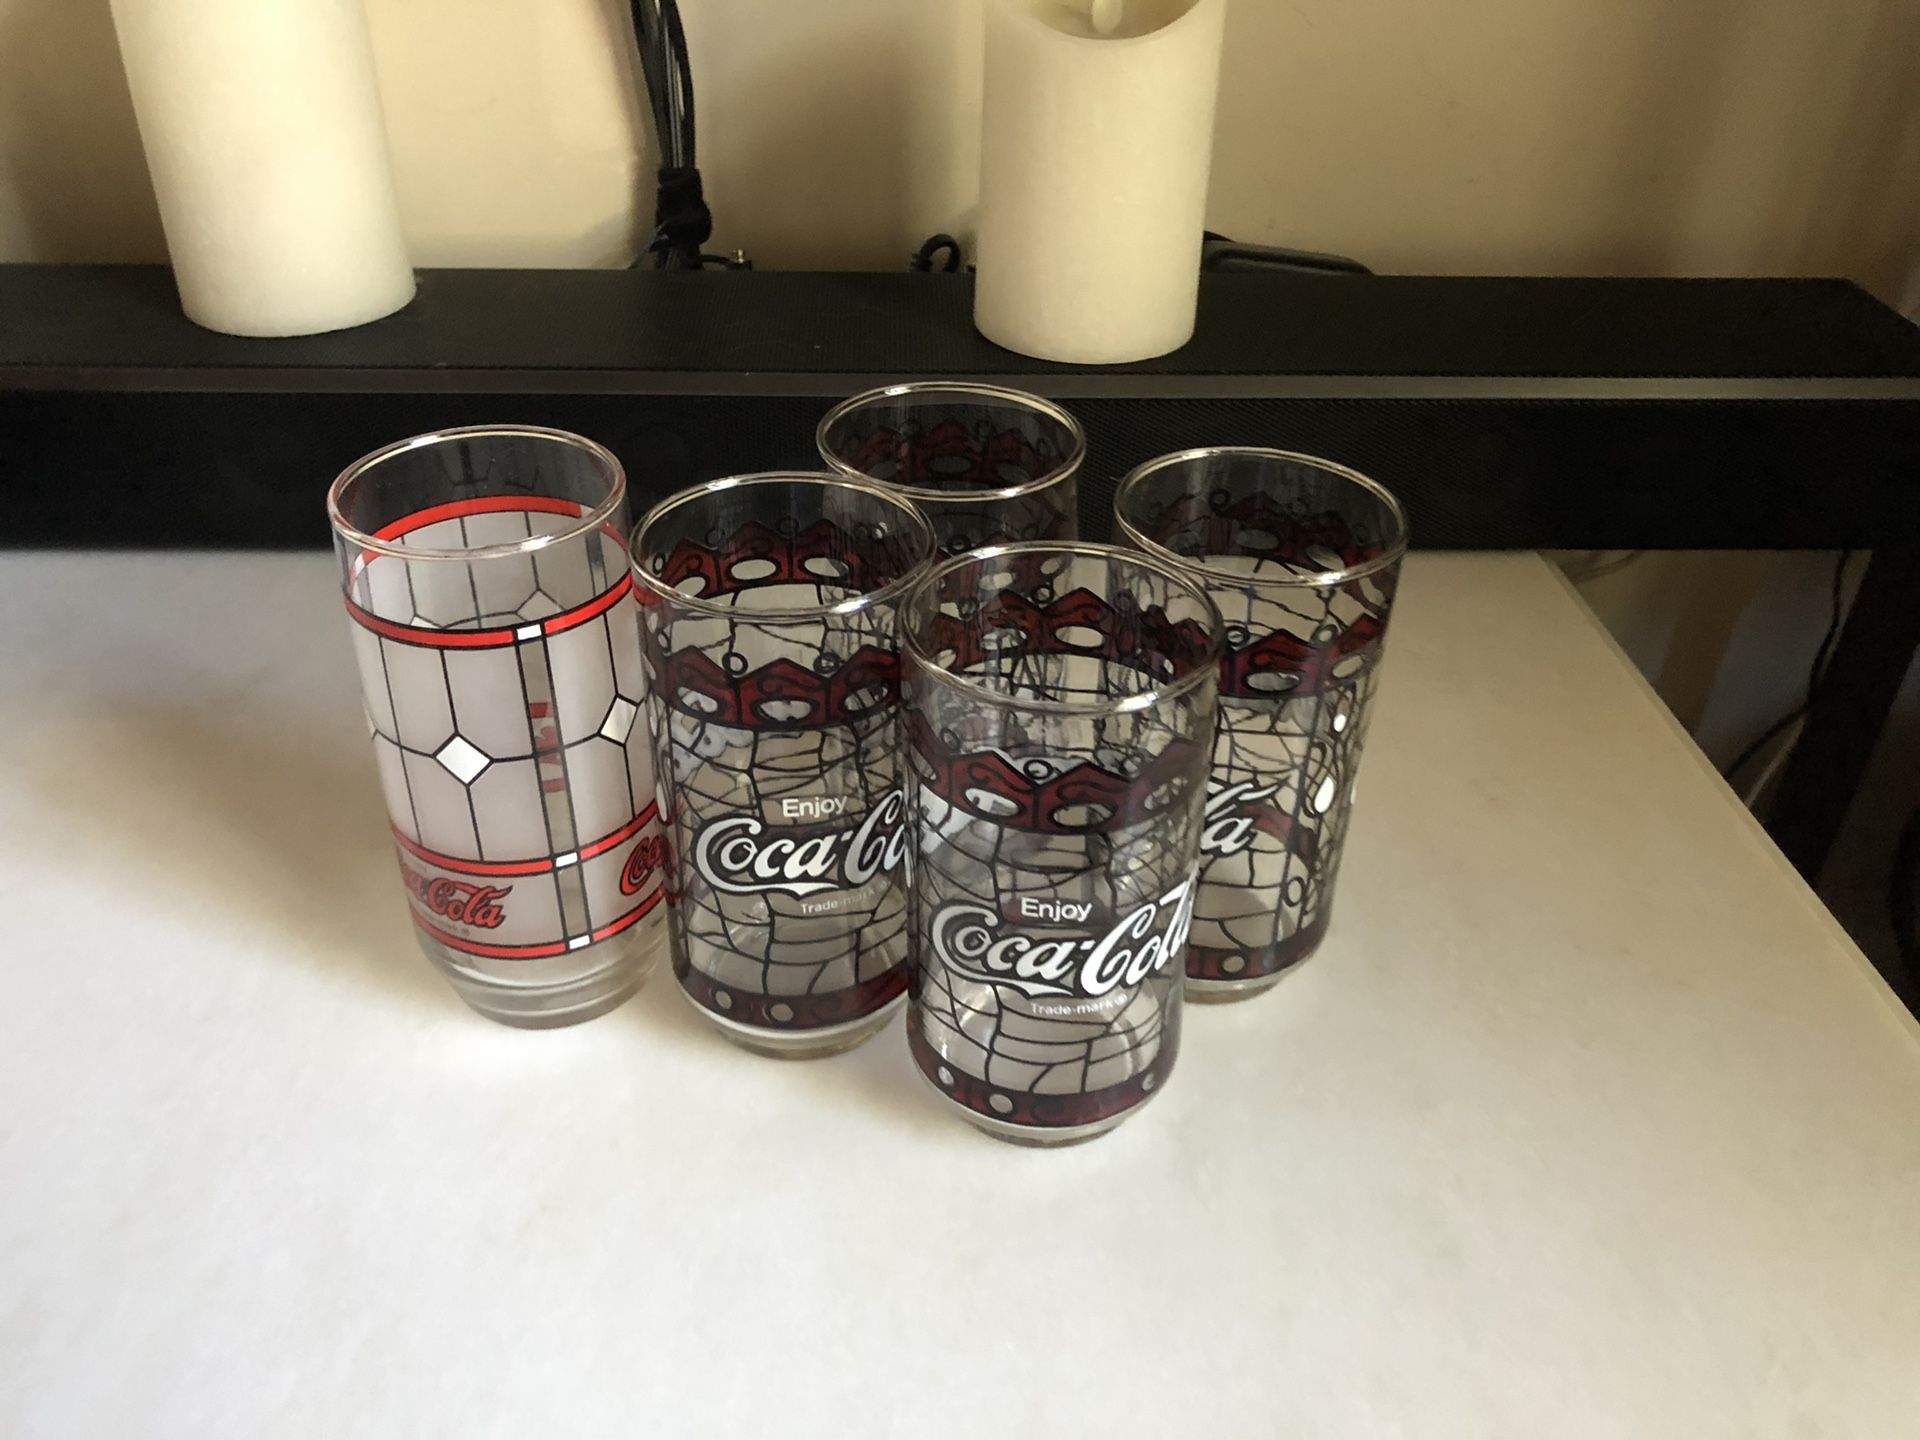 Stained Glass inspired Coke Glasses. Great condition no chips or scratches. 4 set + 1